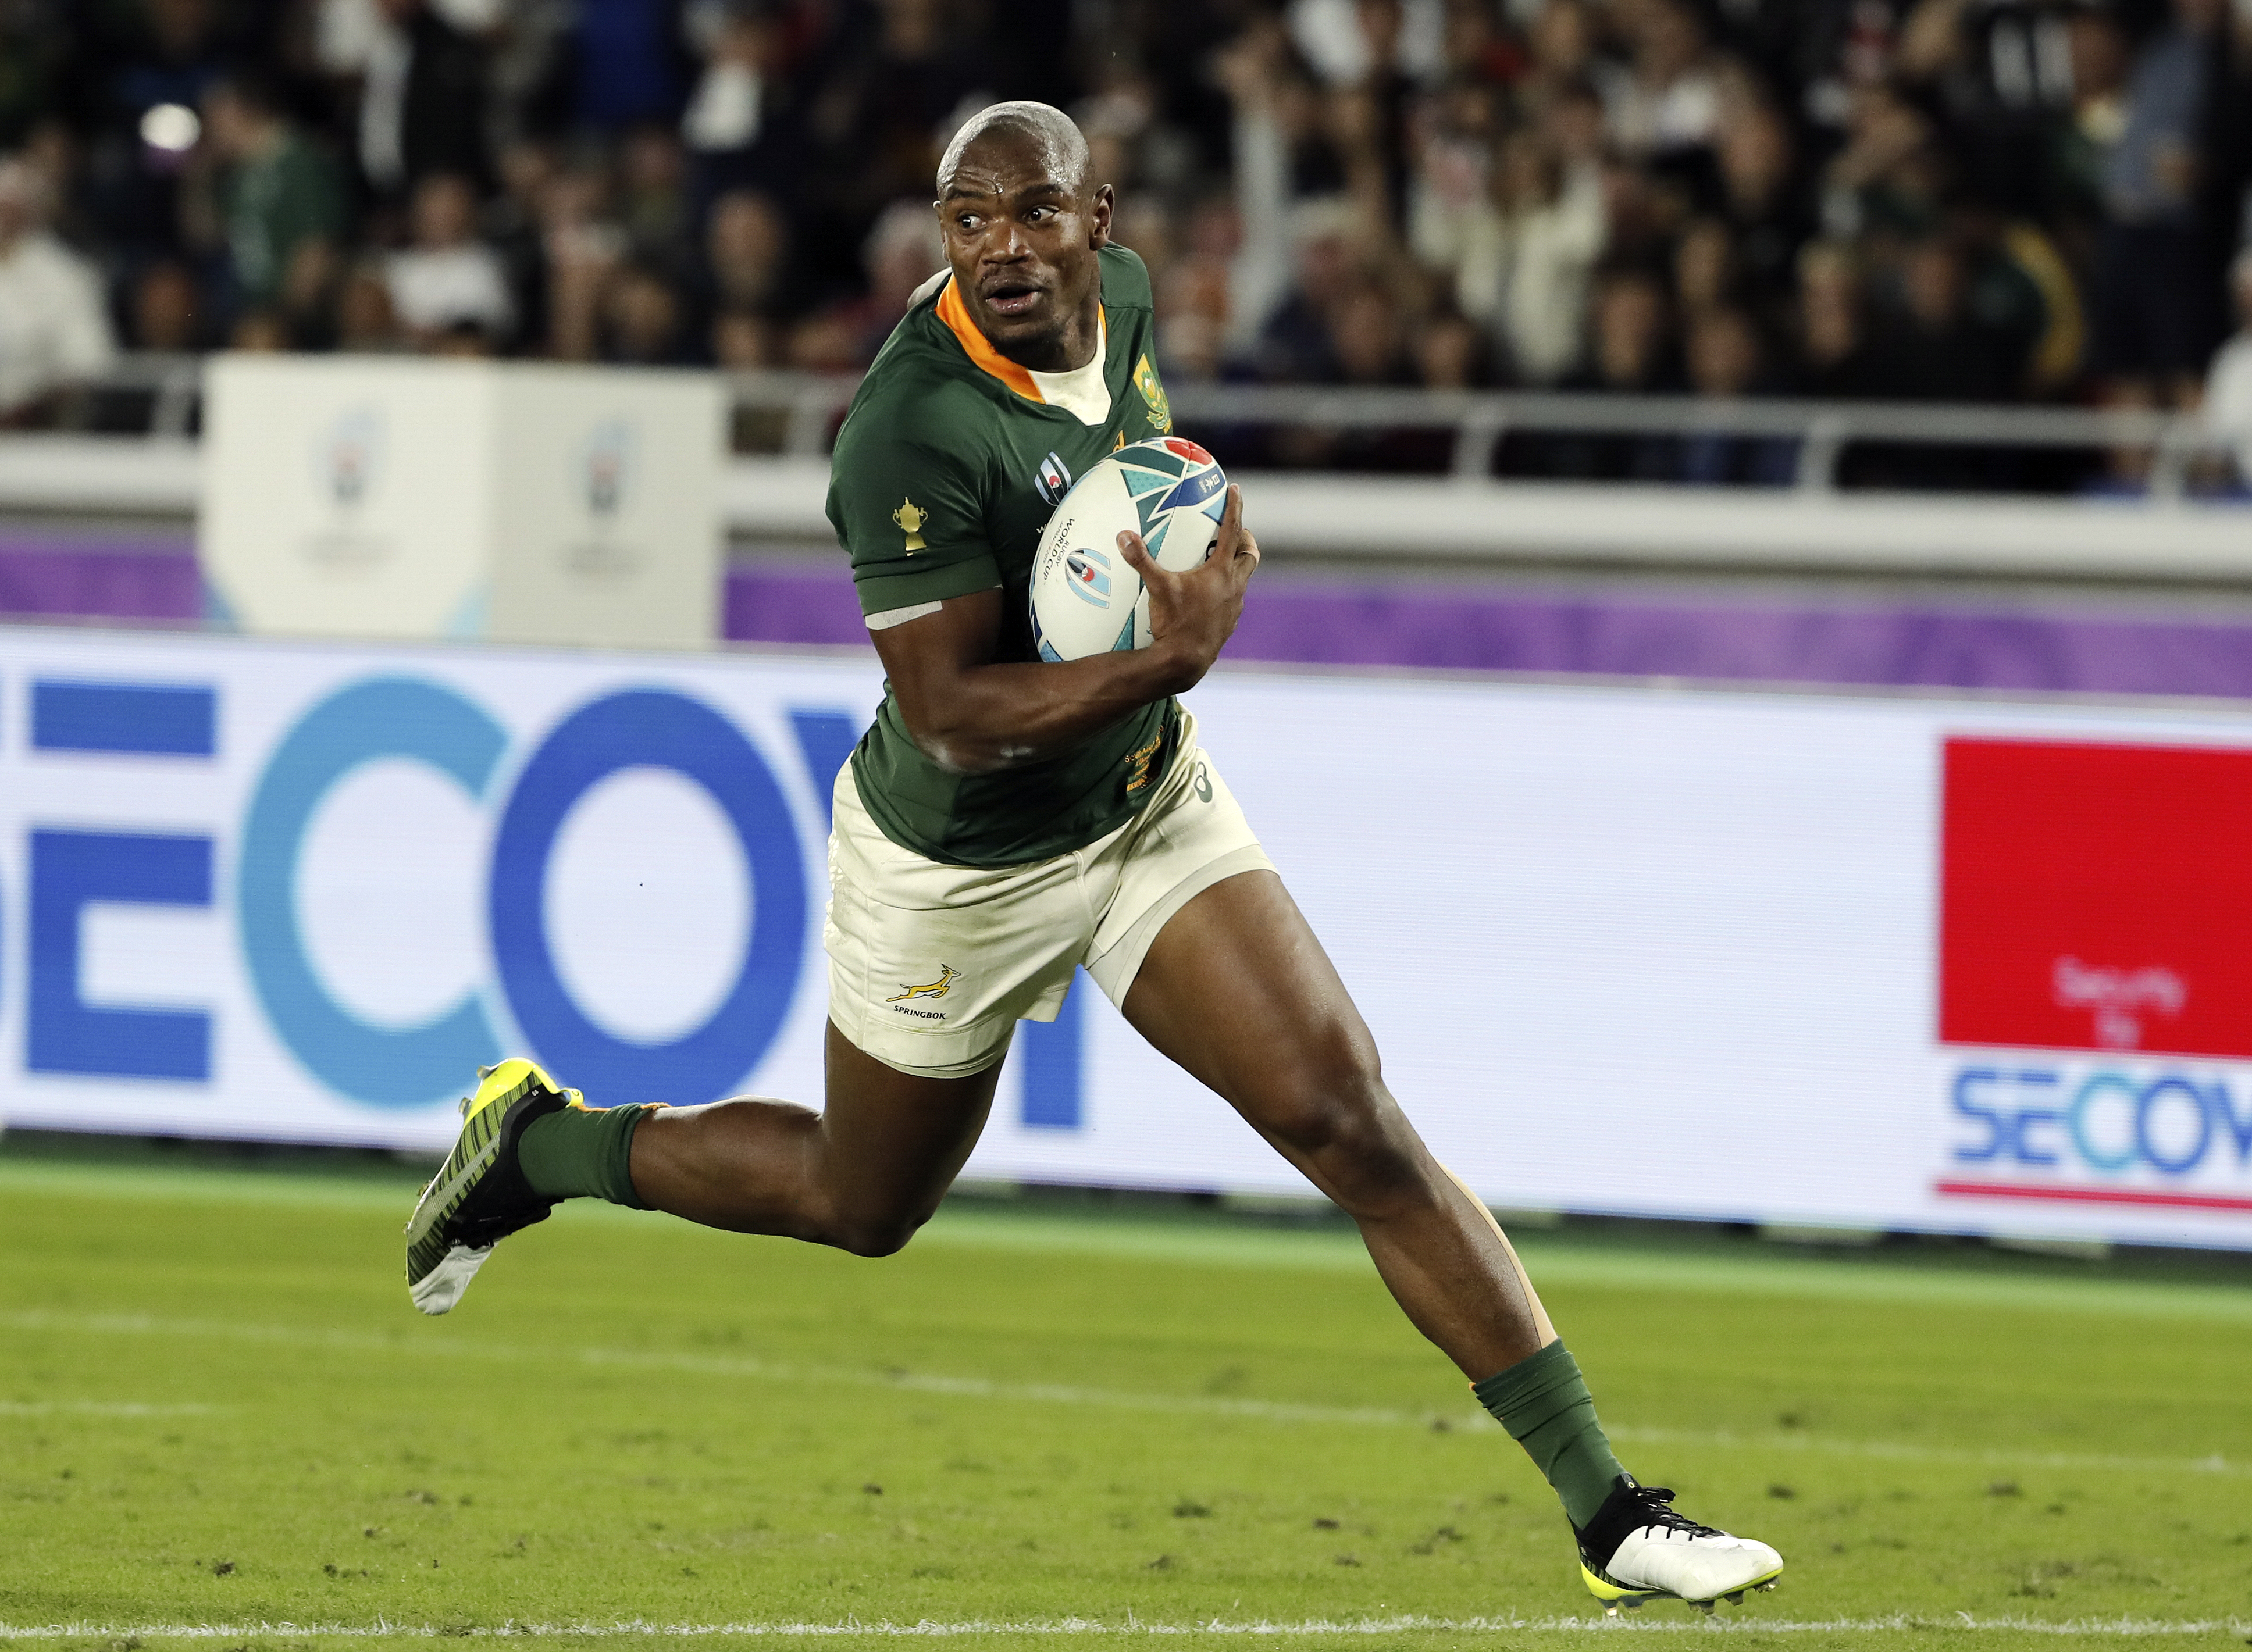 epa07966281 Makazole Mapimpi of South Africa on his way to score a try during the Rugby World Cup final match between England and South Africa at the International Stadium Yokohama, Kanagawa Prefecture, Yokohama, Japan, 02 November 2019. EPA-EFE/MARK R. CRISTINO EDITORIAL USE ONLY/ NO COMMERCIAL SALES / NOT USED IN ASSOCATION WITH ANY COMMERCIAL ENTITY